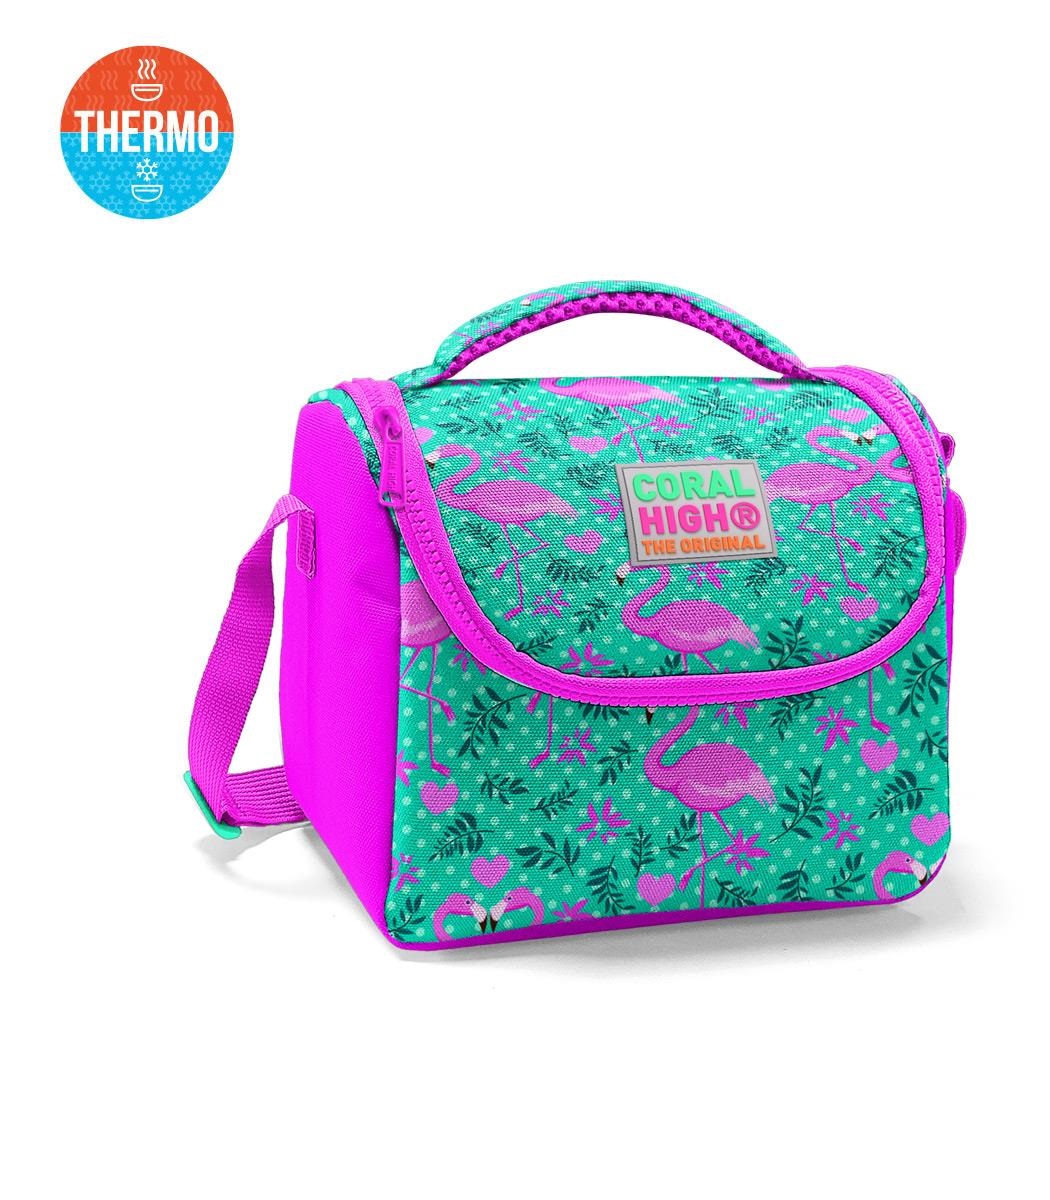 Coral High Kids Thermal Lunch Bag - Water Green Pink Flamingo Patterned